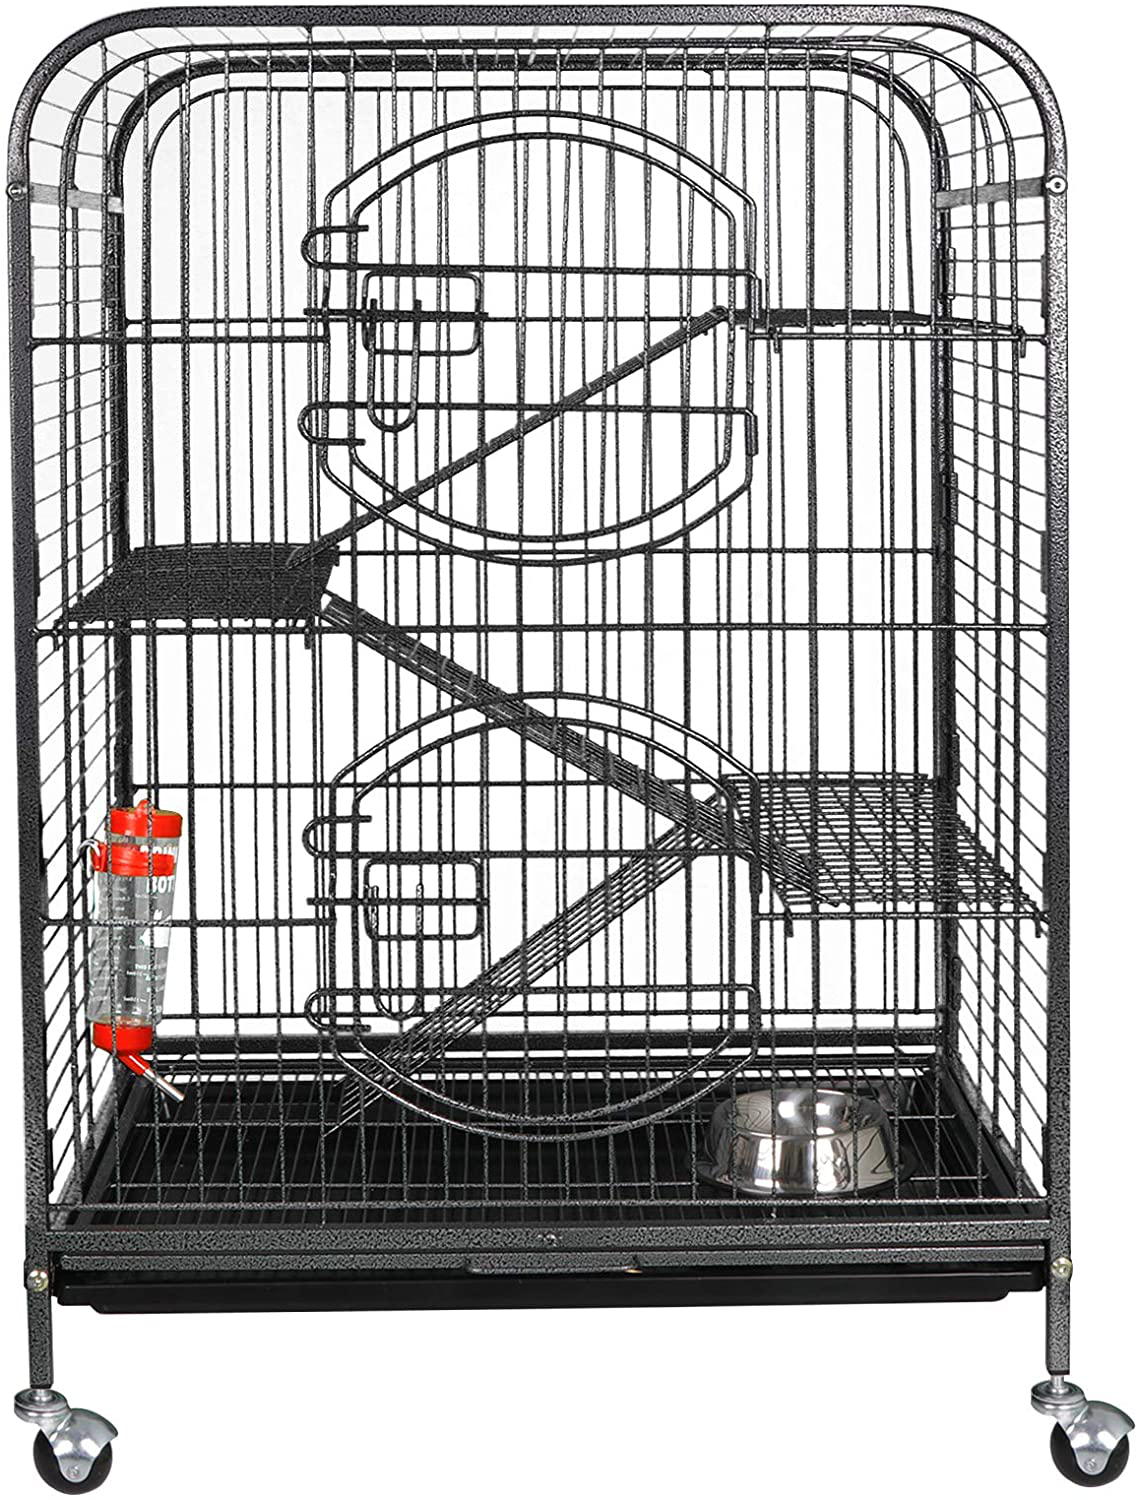 SUPER DEAL 37.2’’ Ferret Cage Chinchilla Guinea Pig Small Animal Cage - 4 Tiers - 3 Ladders - 2 Front Doors - Food Bowl - Water Bottle - Slide Out Trays - Swivel Casters